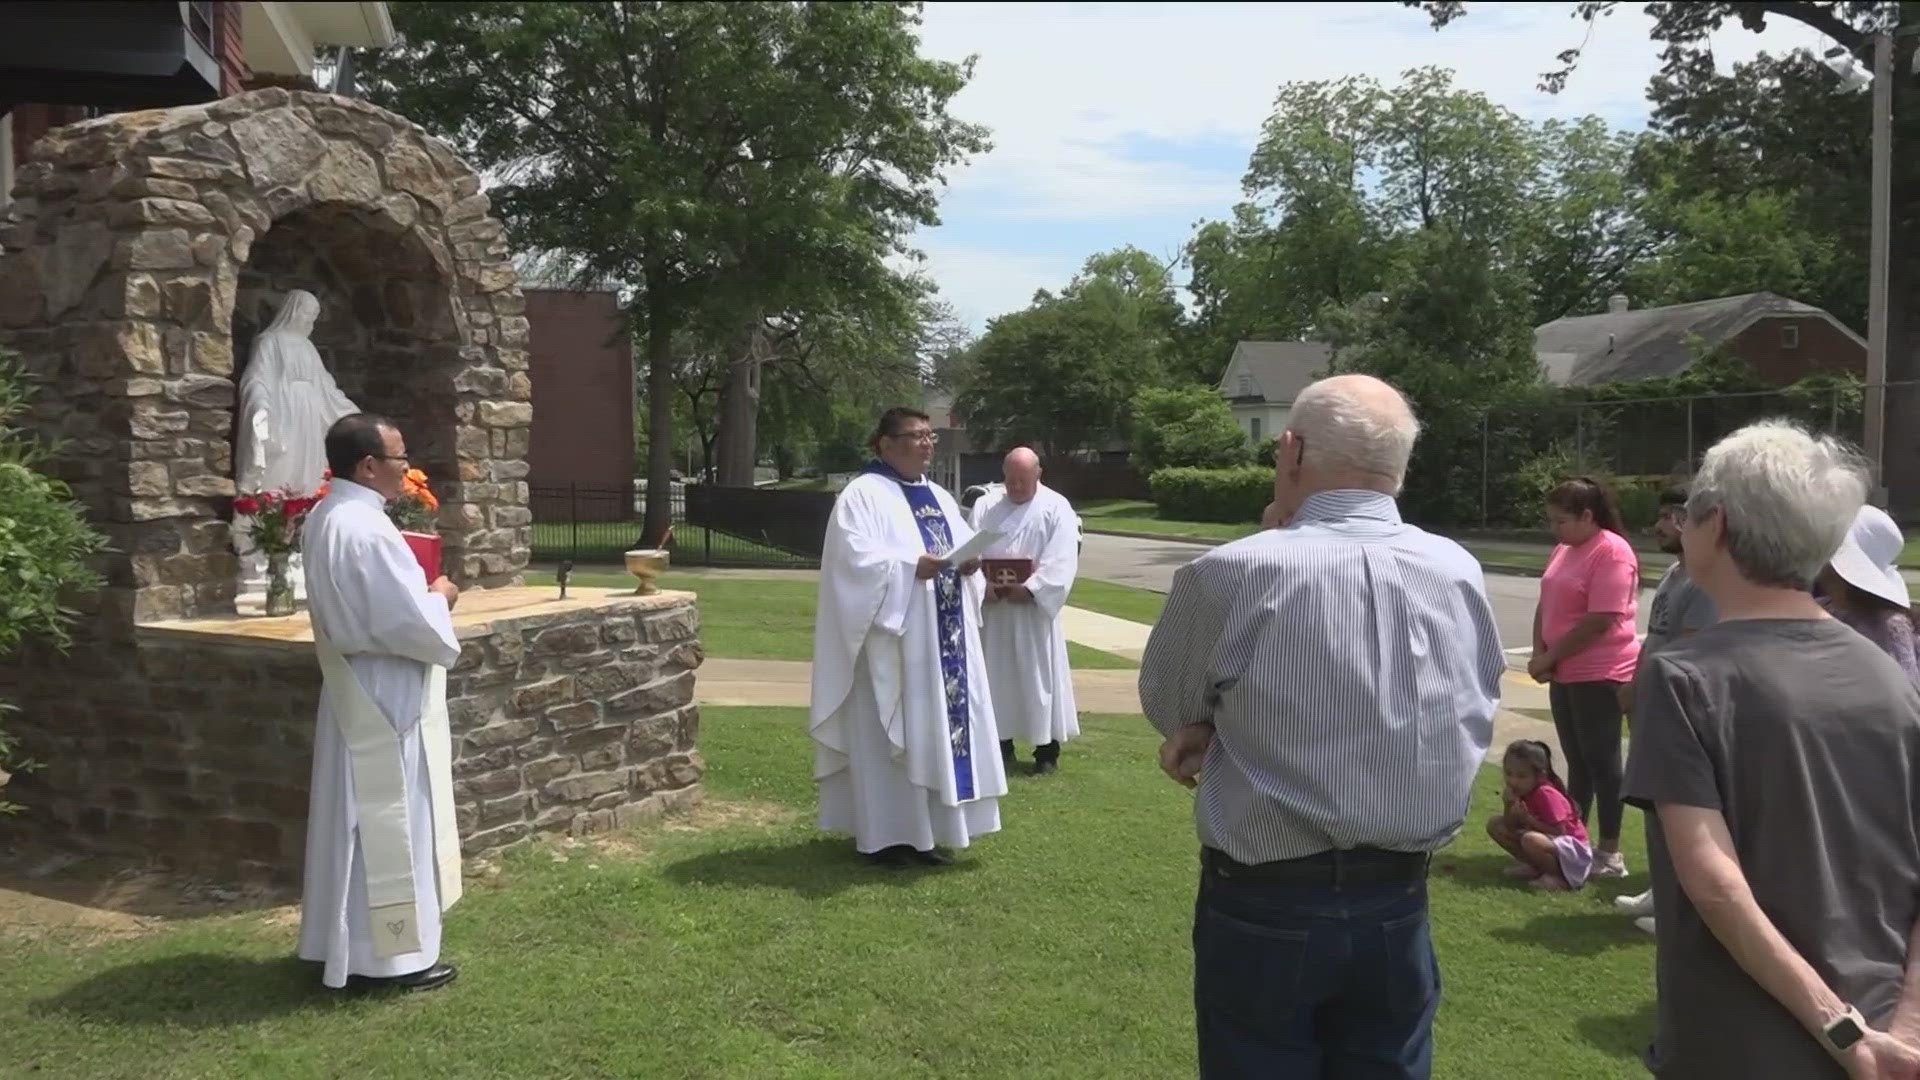 Deacon Brad Brown said the statue is a powerful symbol for the church after it withstood a vehicle crash and helped protect the building it stands in front of.